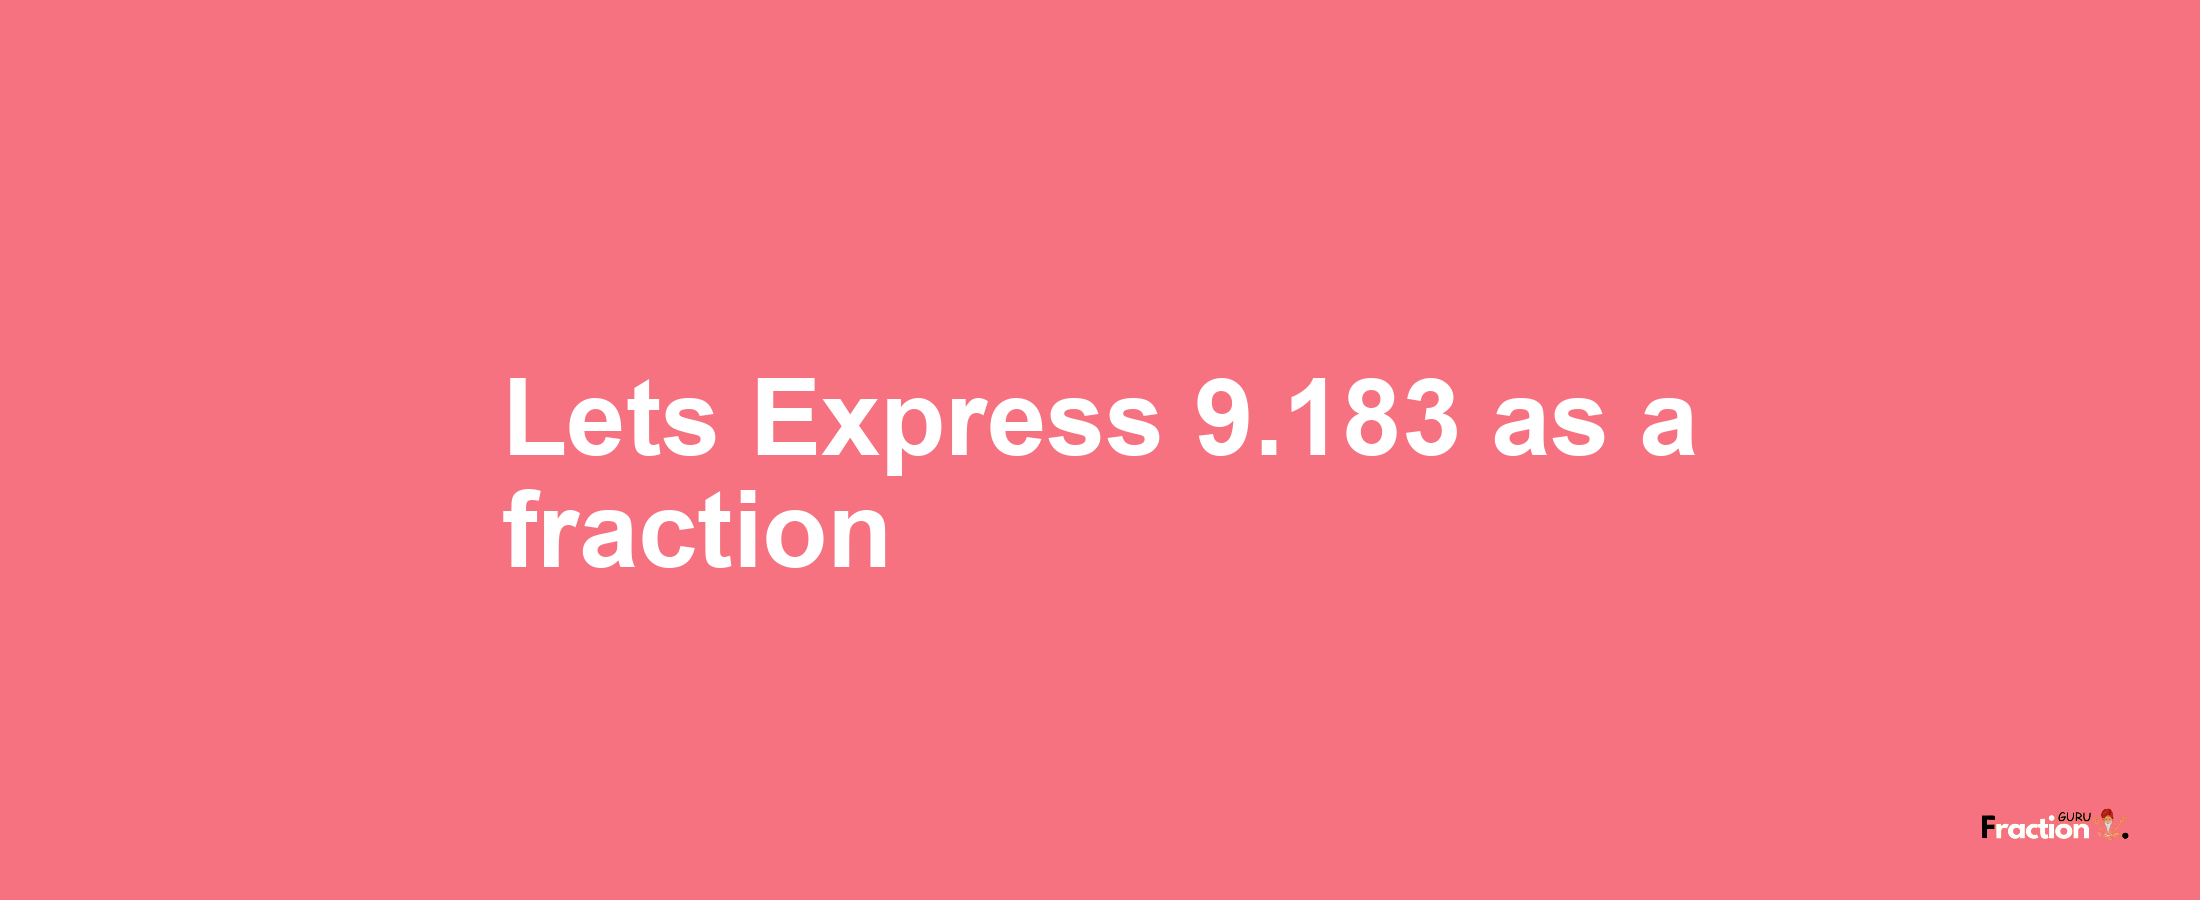 Lets Express 9.183 as afraction